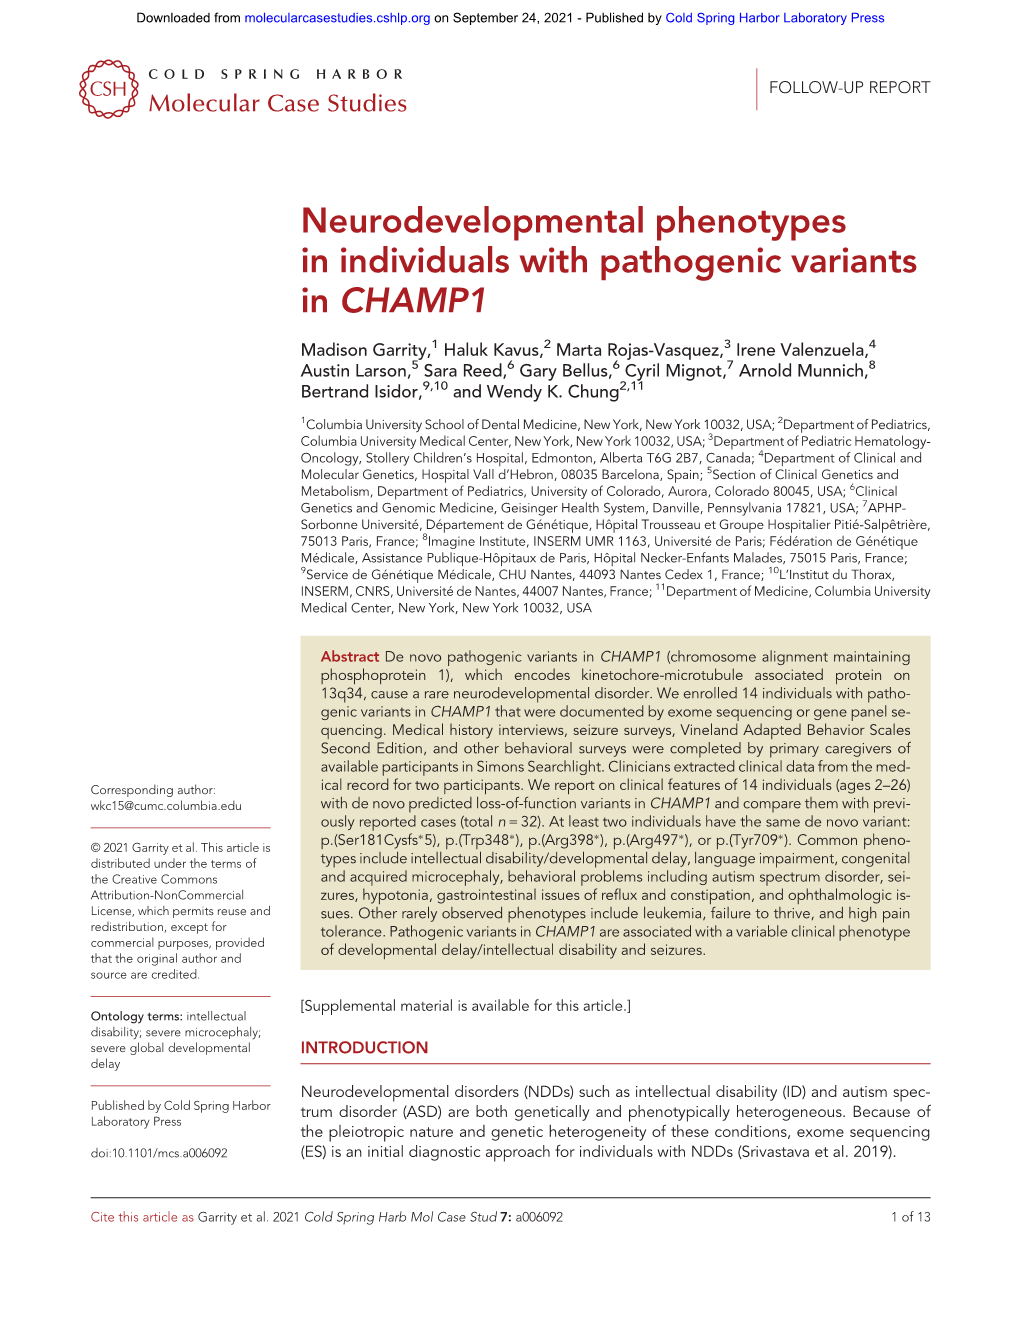 Neurodevelopmental Phenotypes in Individuals with Pathogenic Variants in CHAMP1